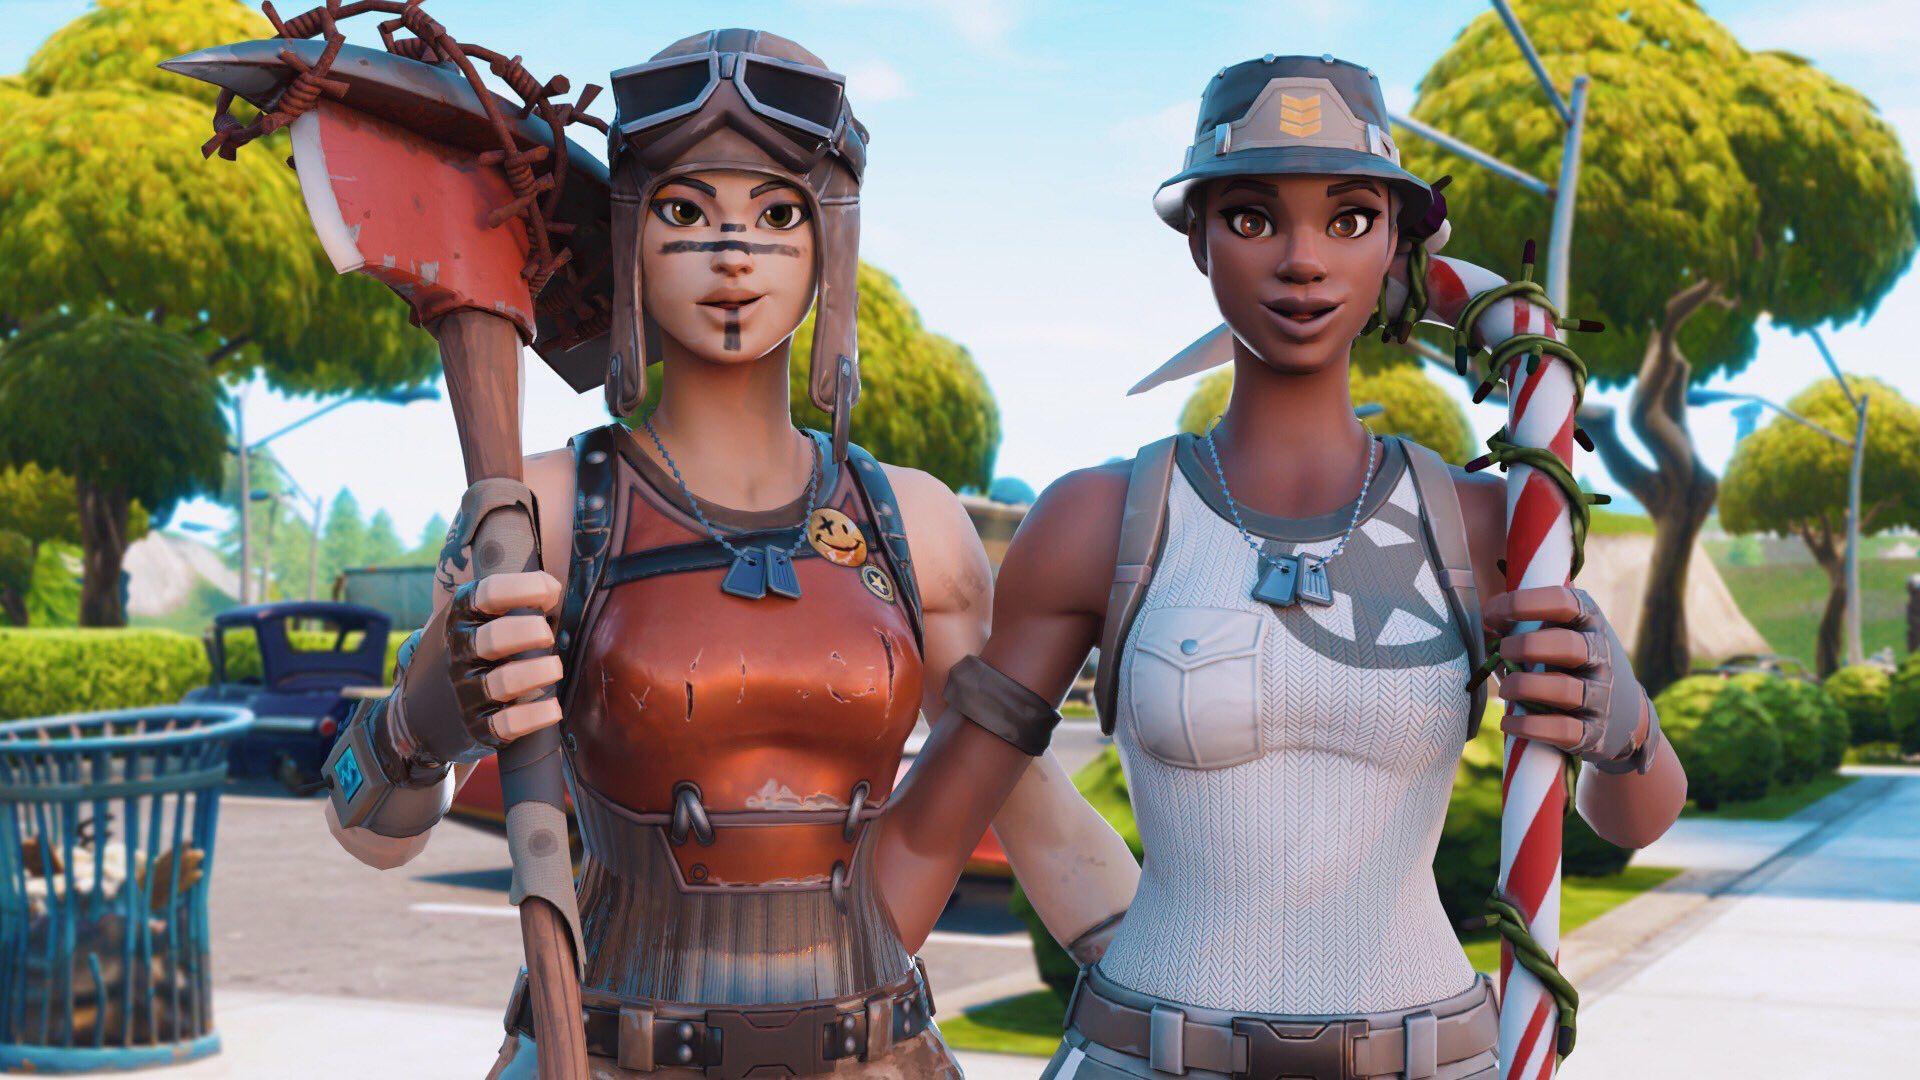 Fortnite reneigate and recon with reneigate revenge and candy axe. Gaming wallpaper, Best gaming wallpaper, Gamer pics